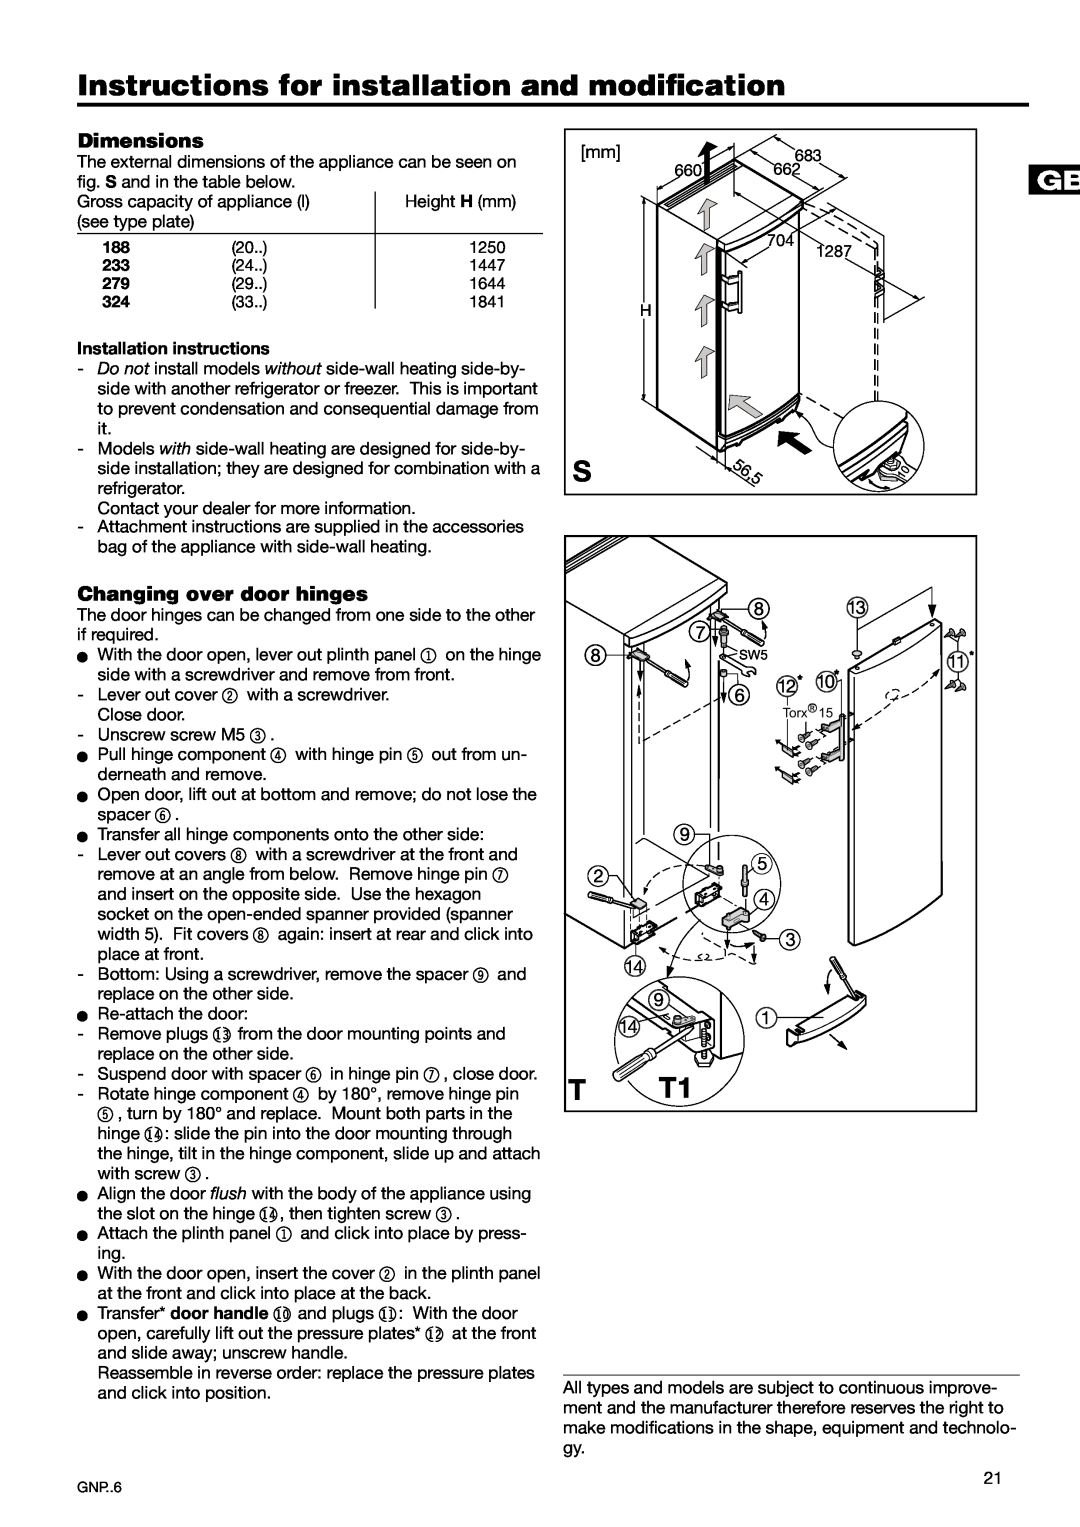 Liebherr 7082 260-00 manual Instructions for installation and modiﬁcation, Dimensions, Changing over door hinges, 56,5 